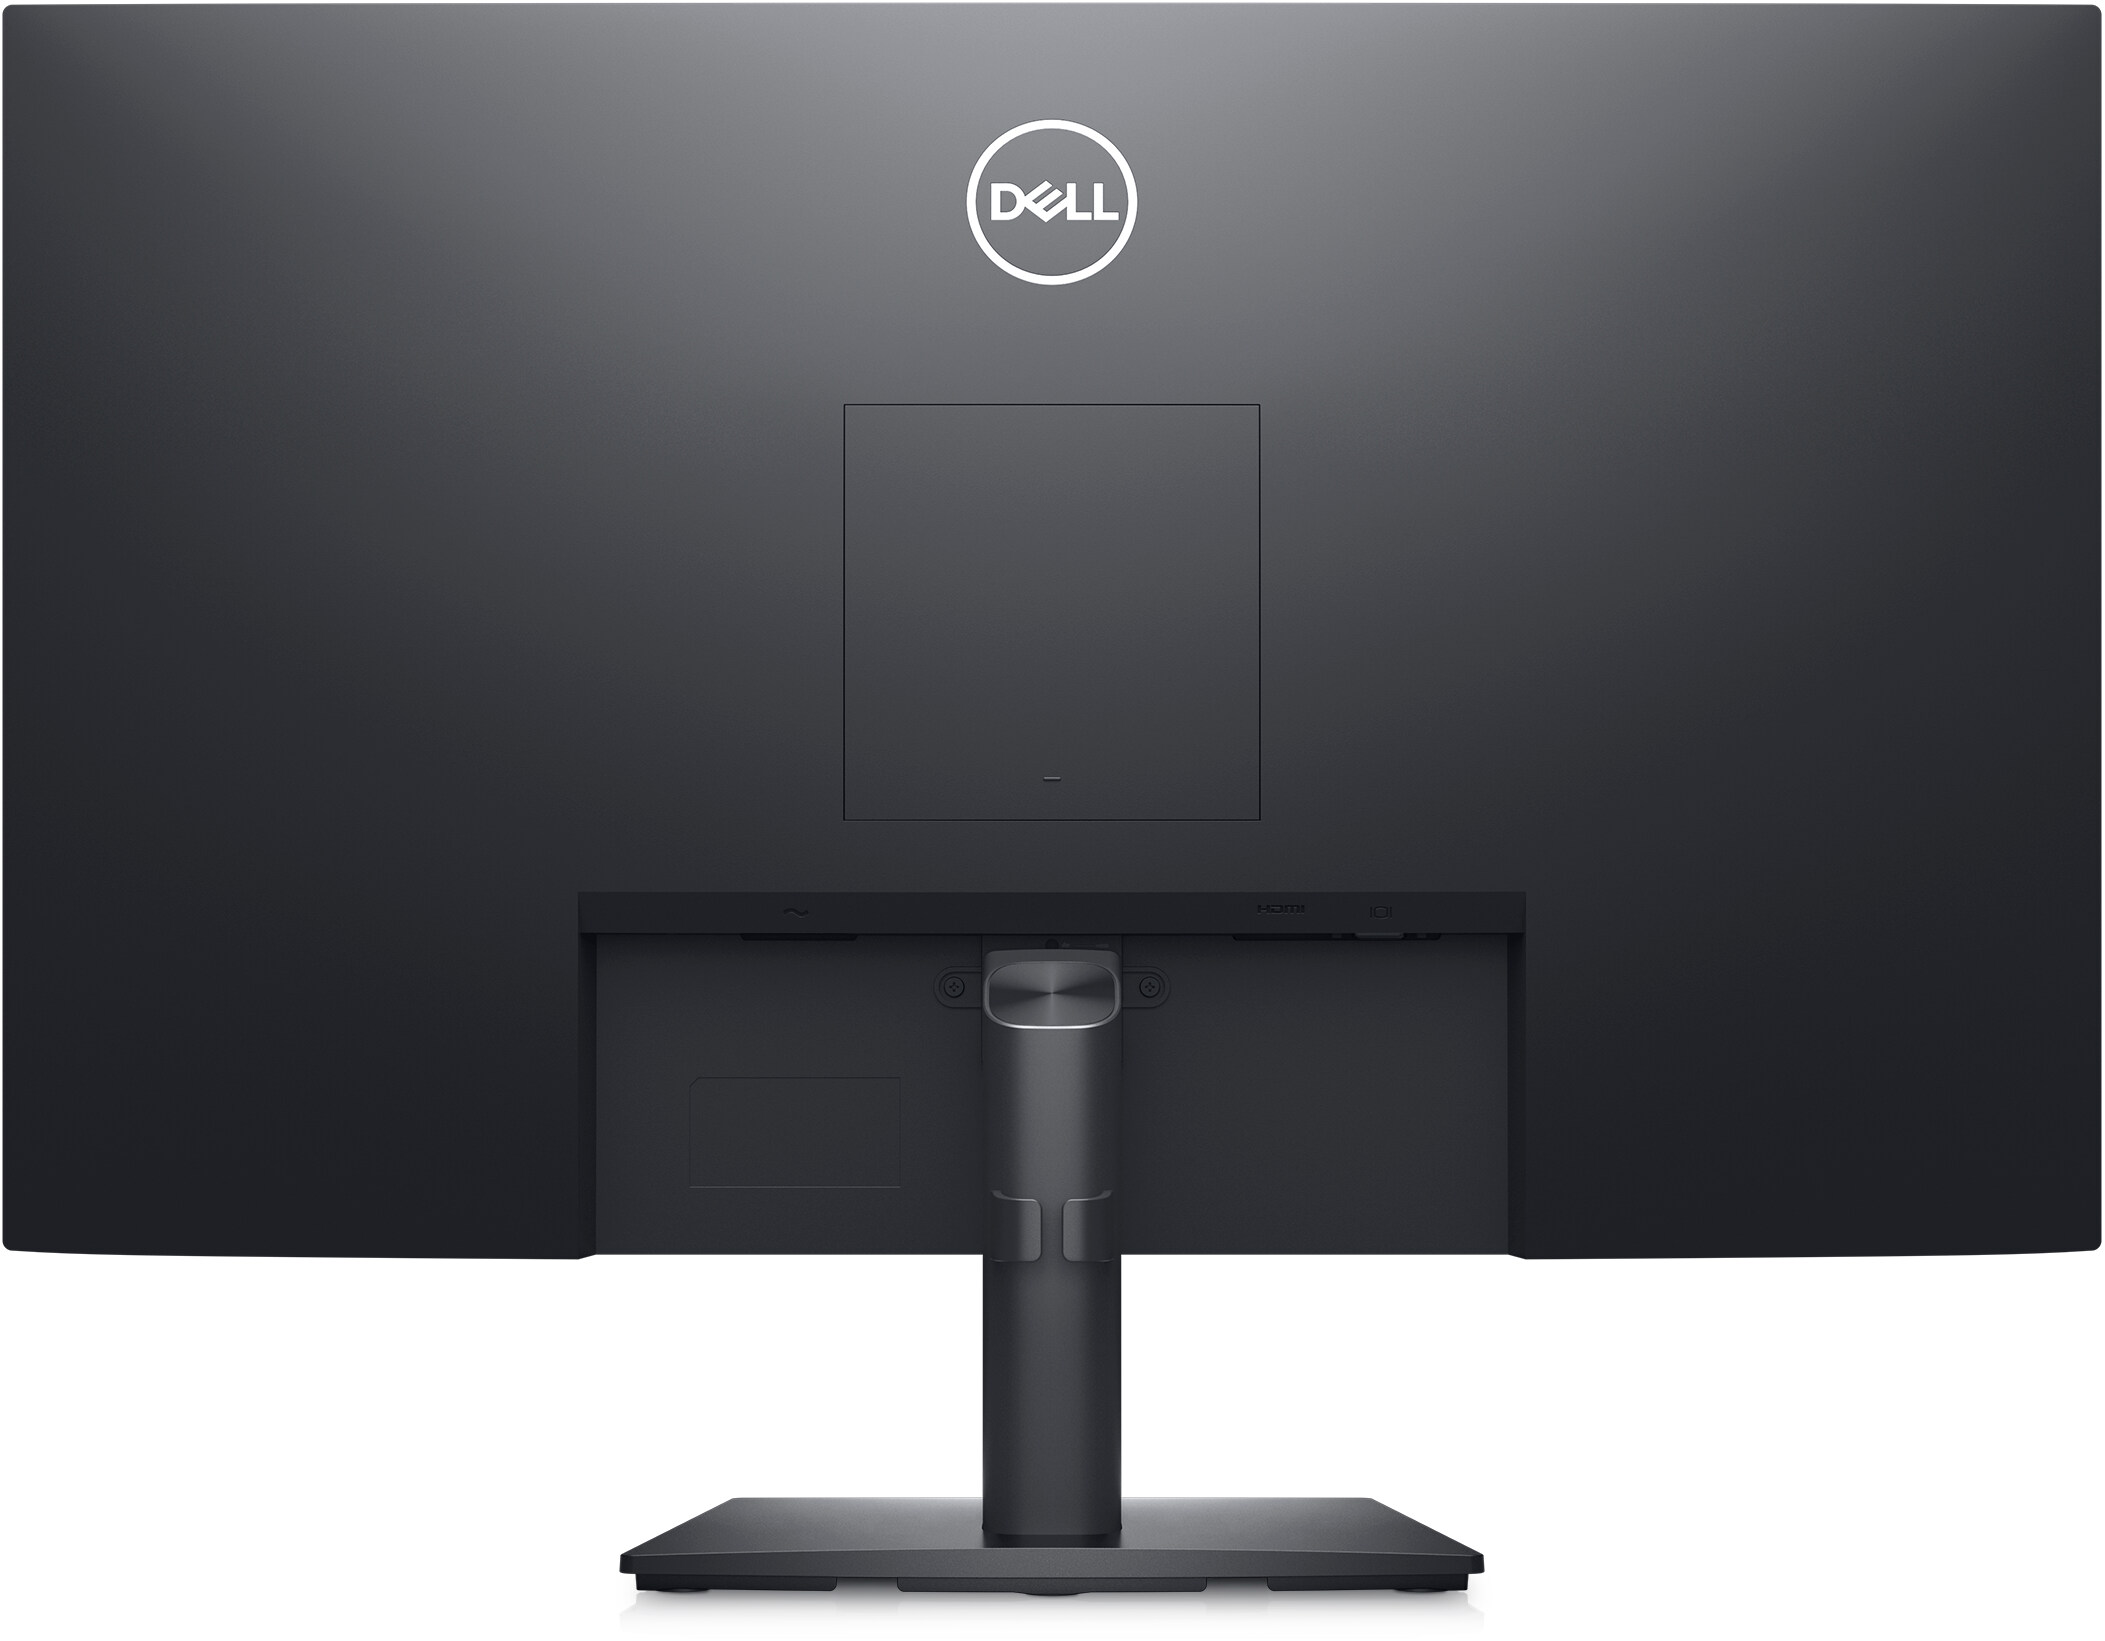 Dell P2422H 23.8 16:9 IPS Monitor P2422H B&H Photo Video